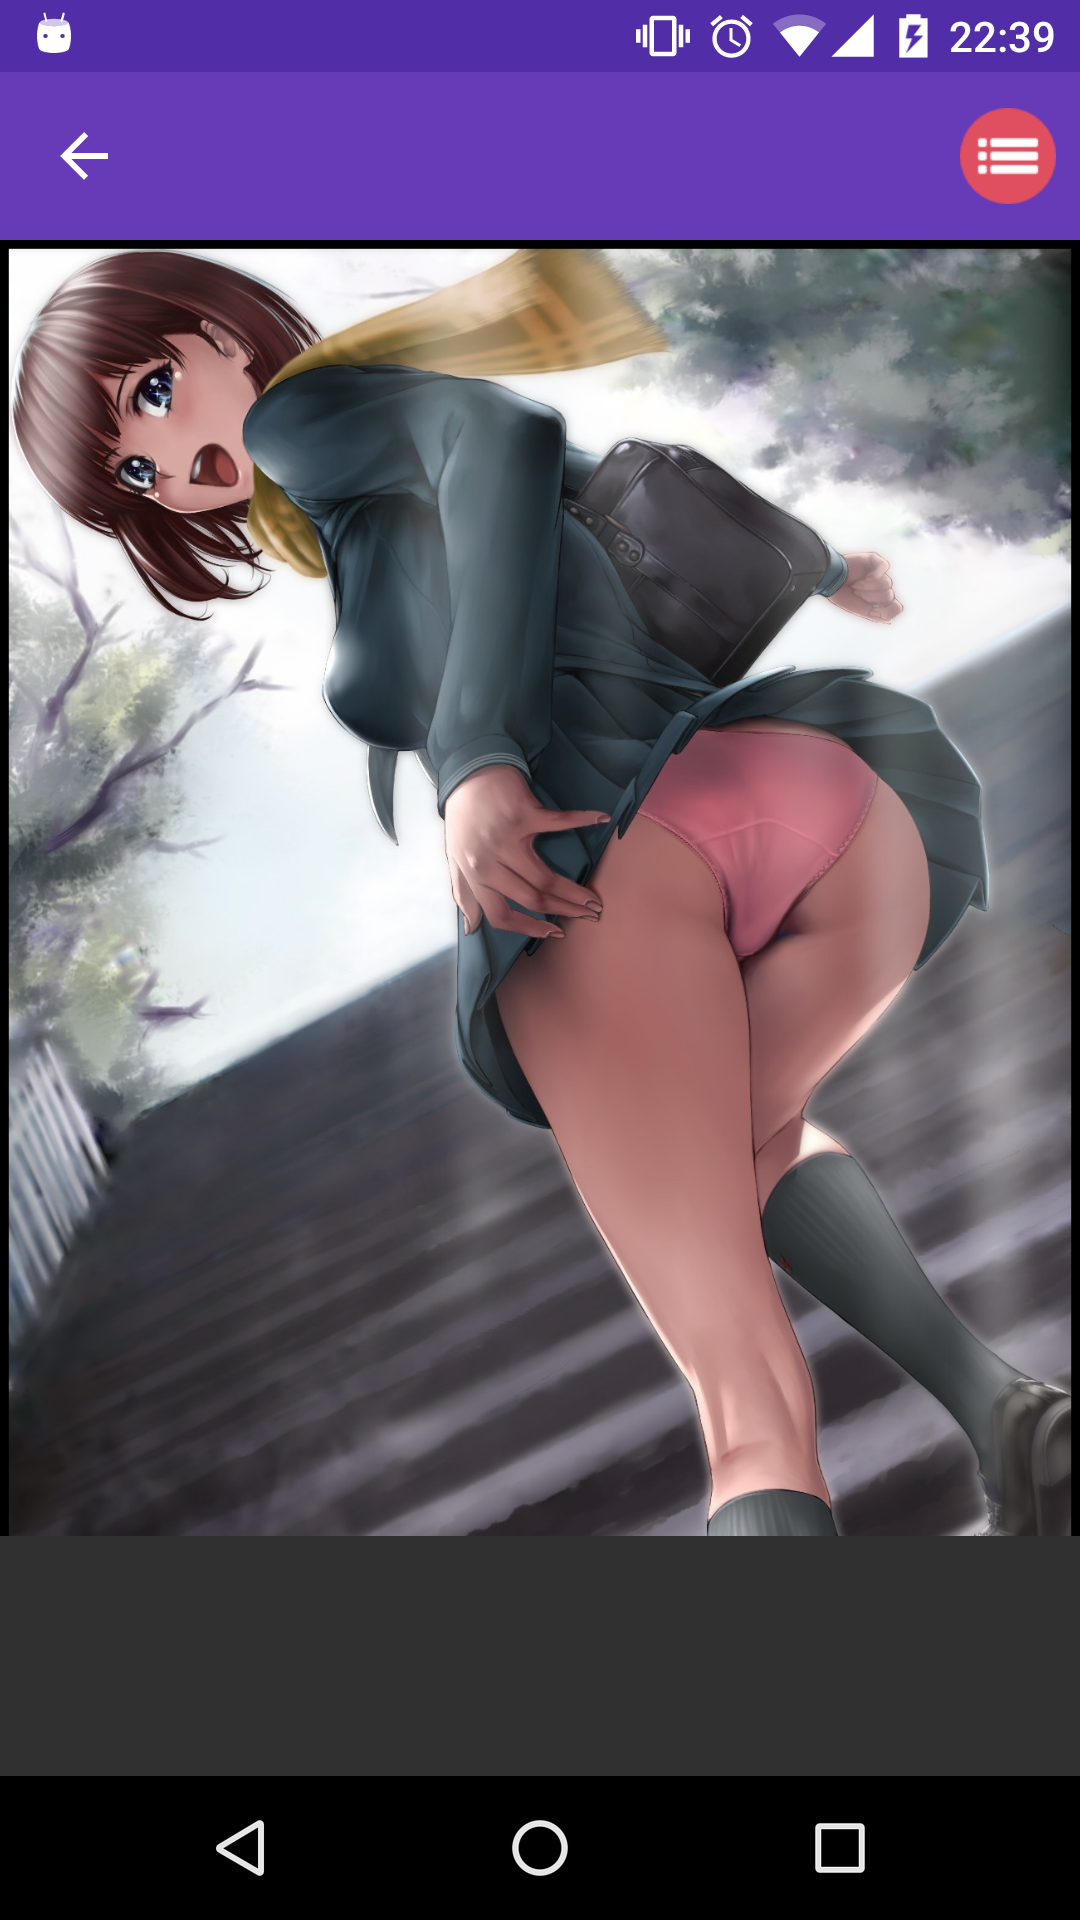 Anime Girls Backgrounds futanari,girls,phone,app,hentay,gallerys,anime,porn,sexy,wallpapers,backgrounds,apps,pornstar,pic,nhentai,galleries,picture,download,apk,hentai